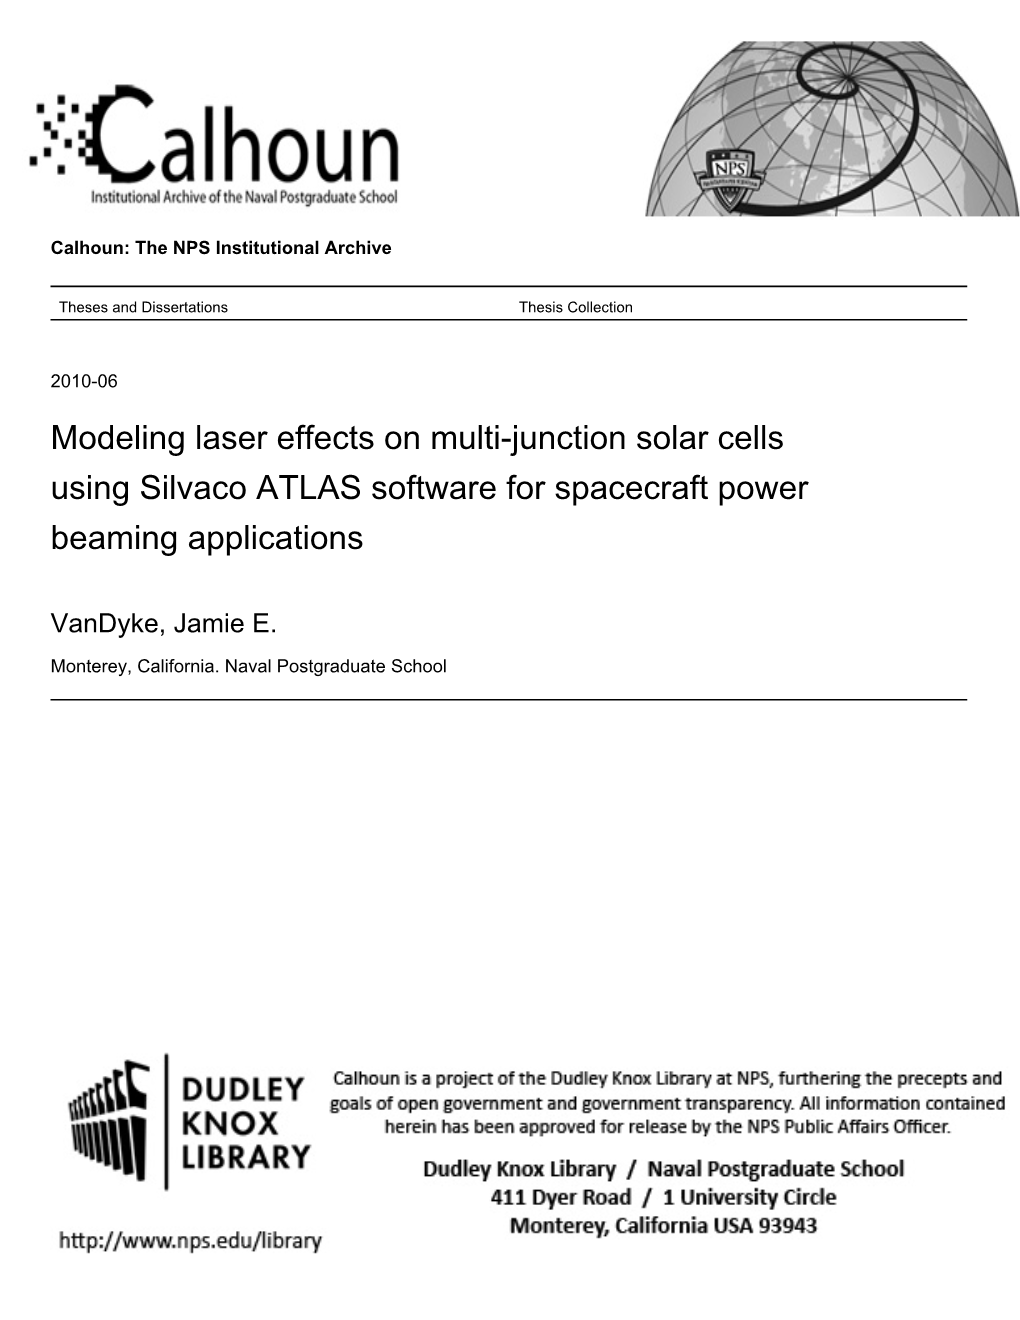 Modeling Laser Effects on Multi-Junction Solar Cells Using Silvaco ATLAS Software for Spacecraft Power Beaming Applications